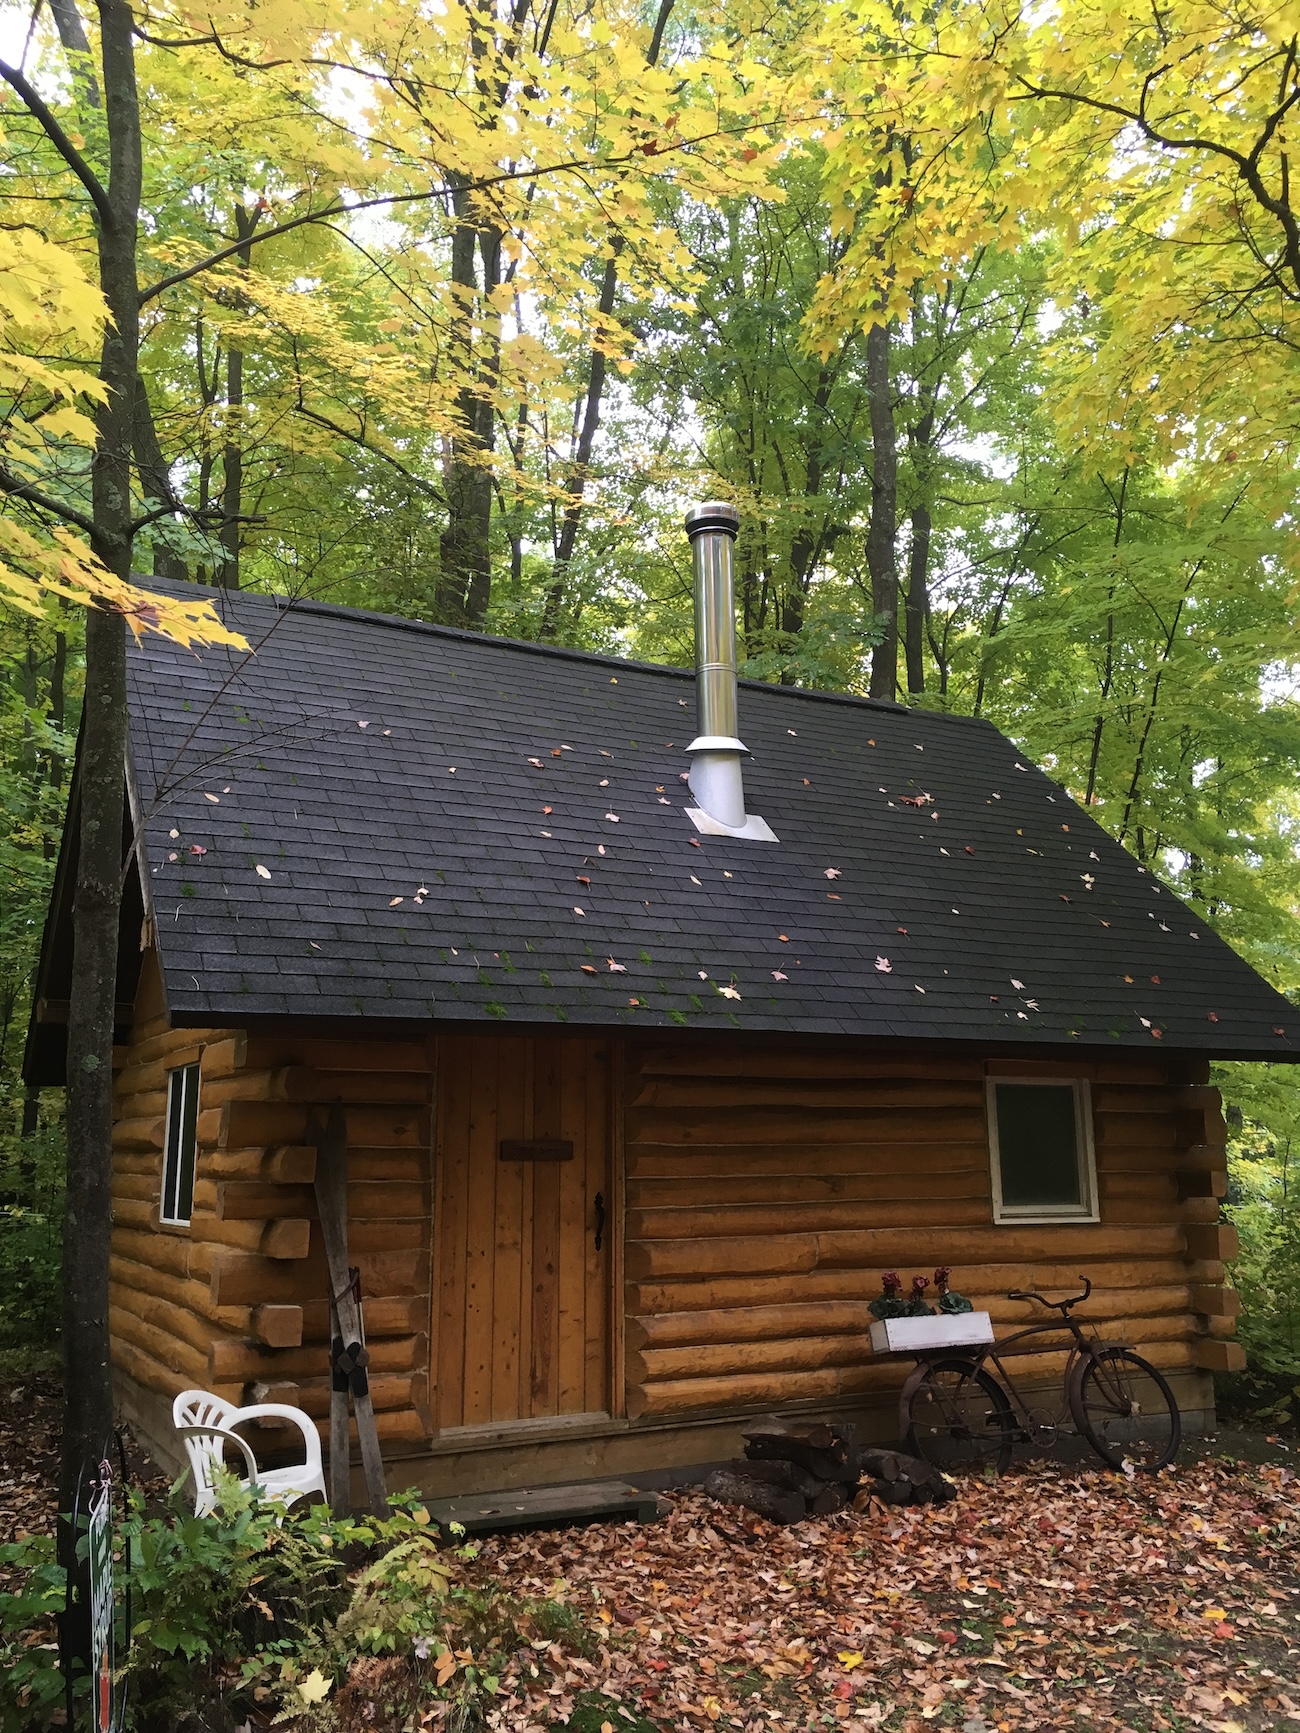 Our cabin in the summer